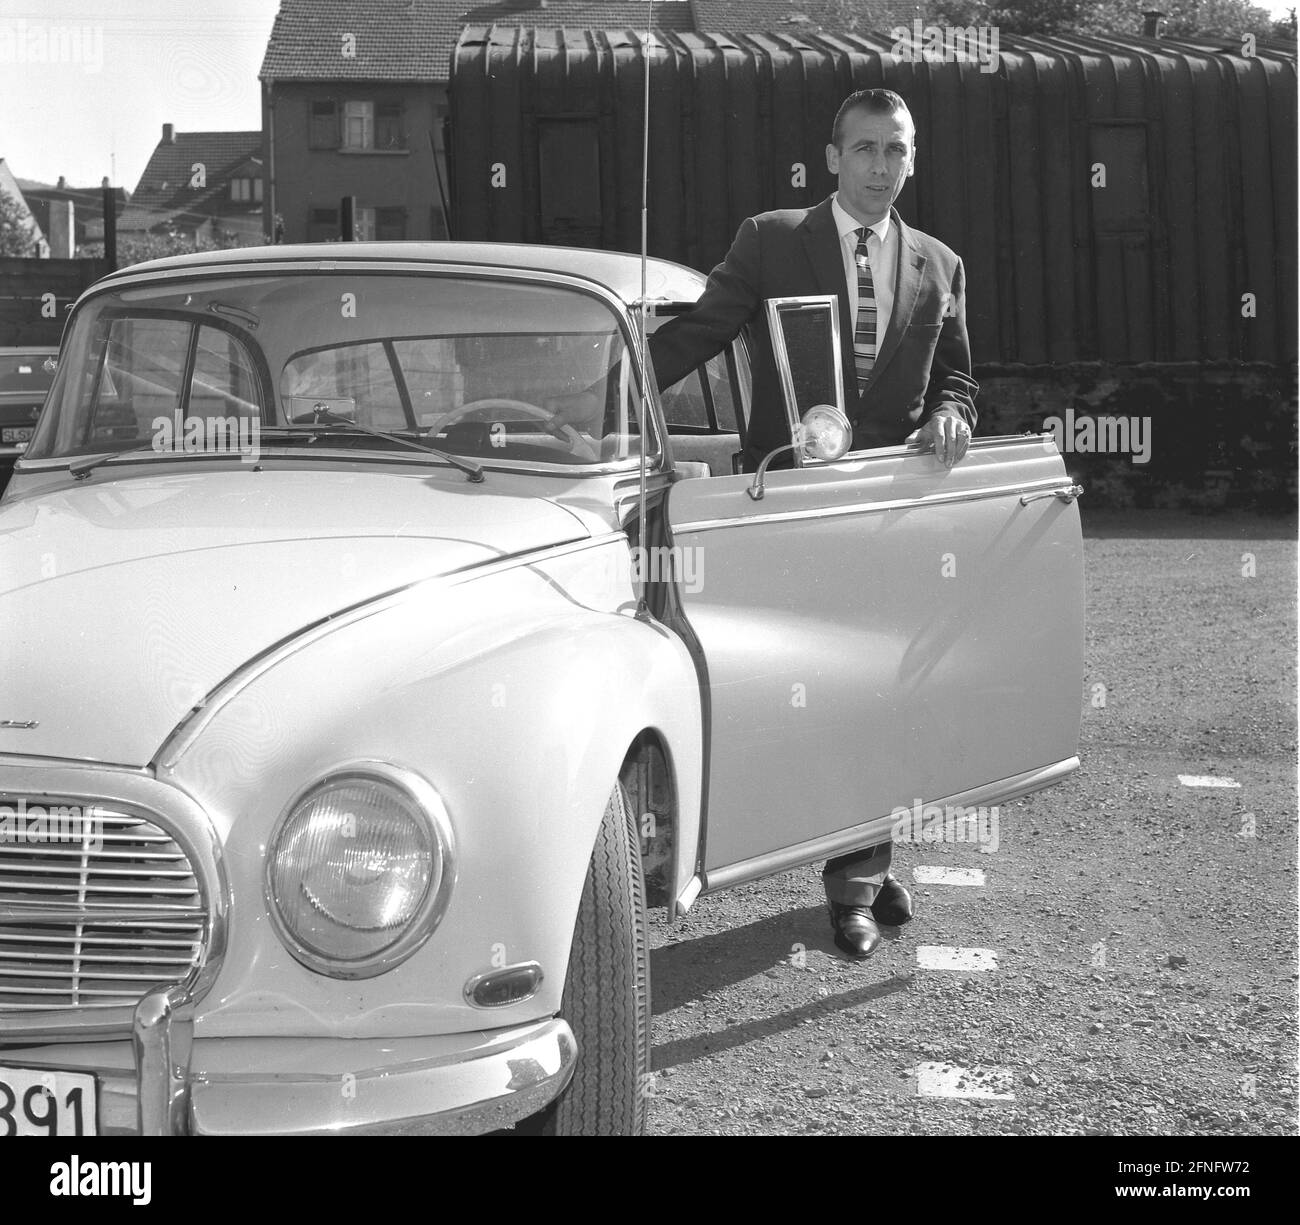 Horst Eckel as the proud owner of a DKW/Auto Union 1000s Recording 20.05.1964 in Völklingen BRD Germany No model release ! [automated translation] Stock Photo